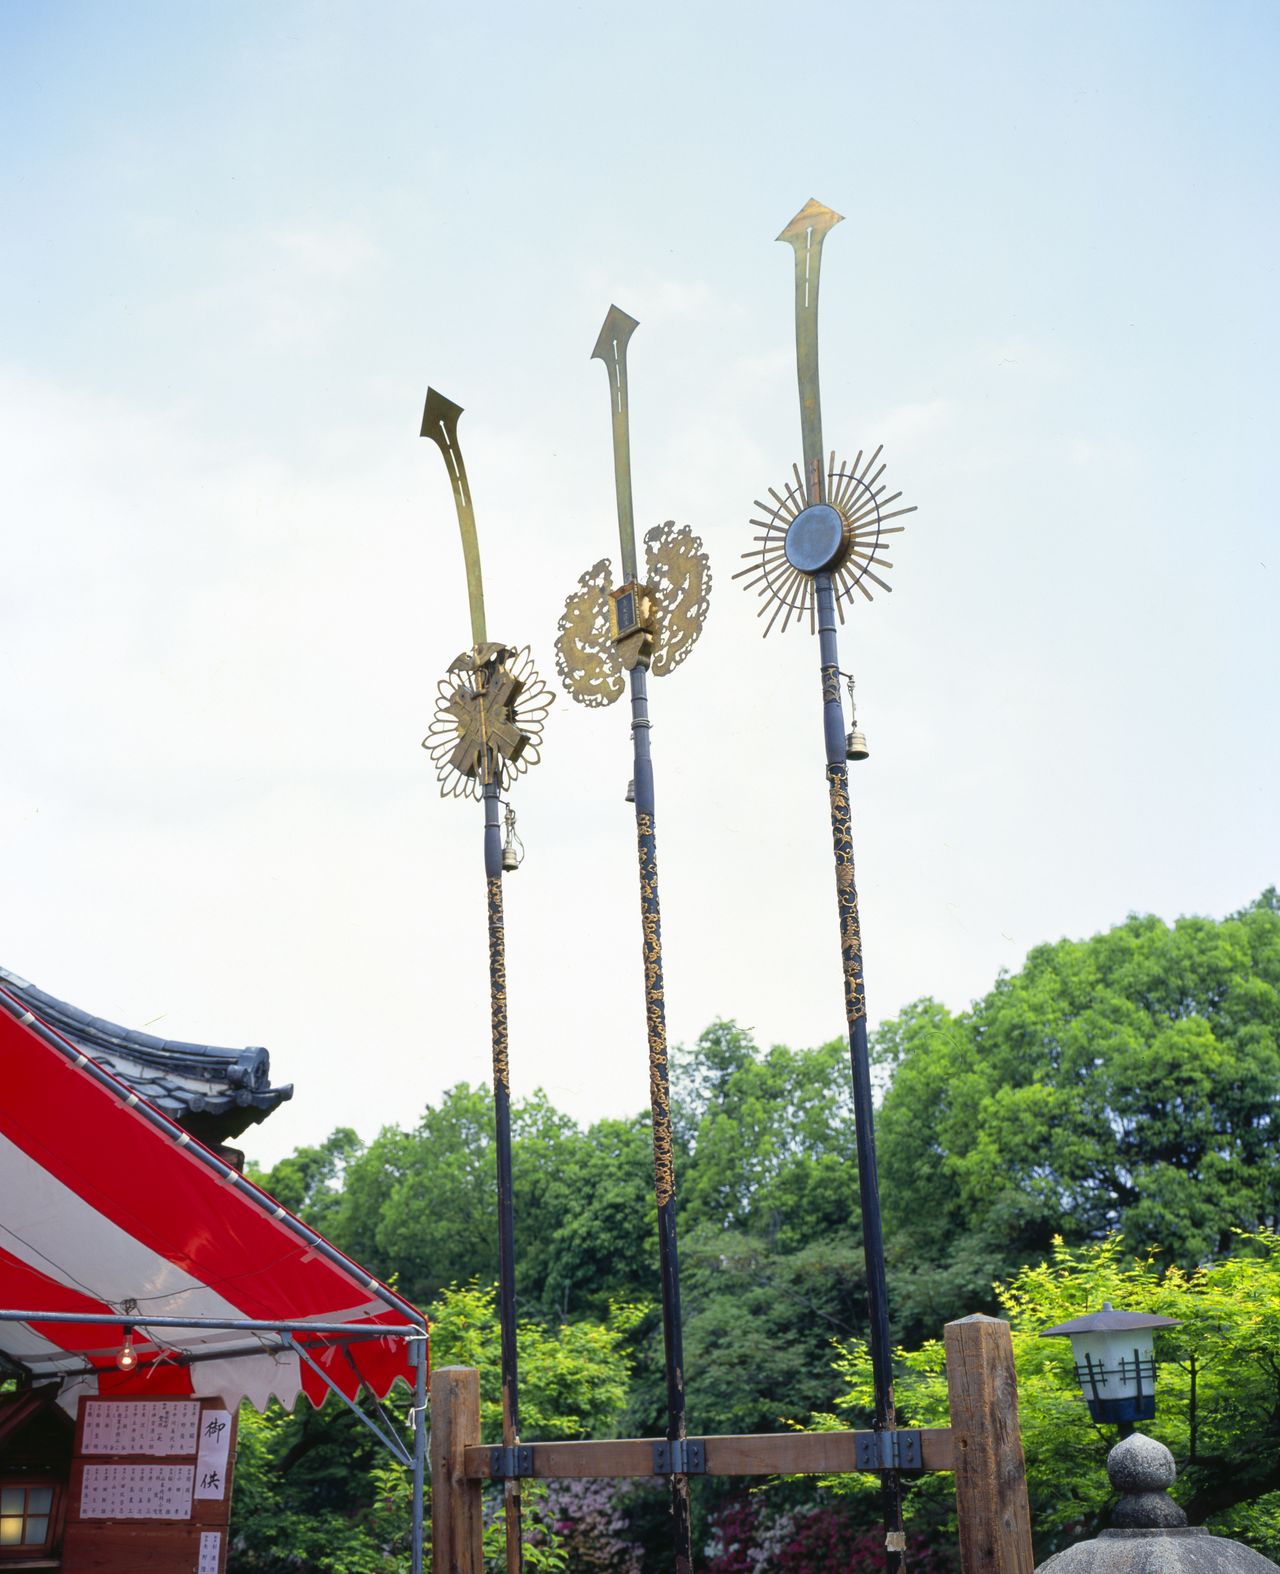 The kenhoko halberds standing in Shinsen’en. These ritual implements, which lead mikoshi portable shrine processions, are said to be the antecedents of the yamahoko. (© Haga Library)